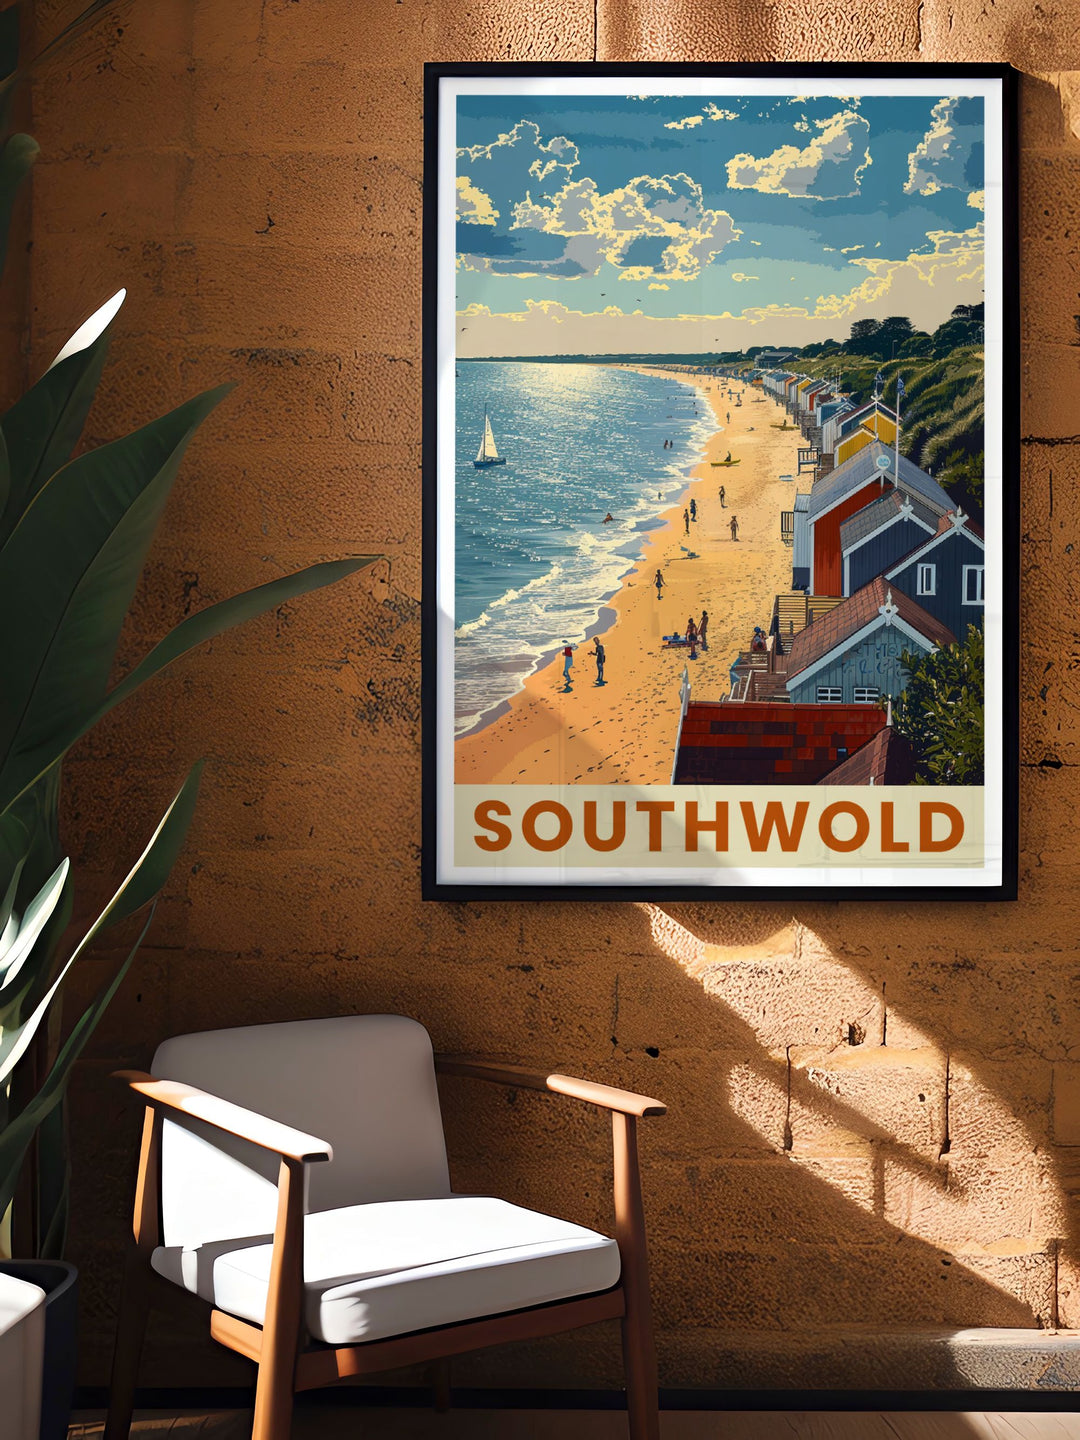 Southwold Beach Huts and Seaside Poster capturing the vibrant colors and tranquil beauty of Southwolds coastline a must have vintage travel print for UK travel enthusiasts and art collectors